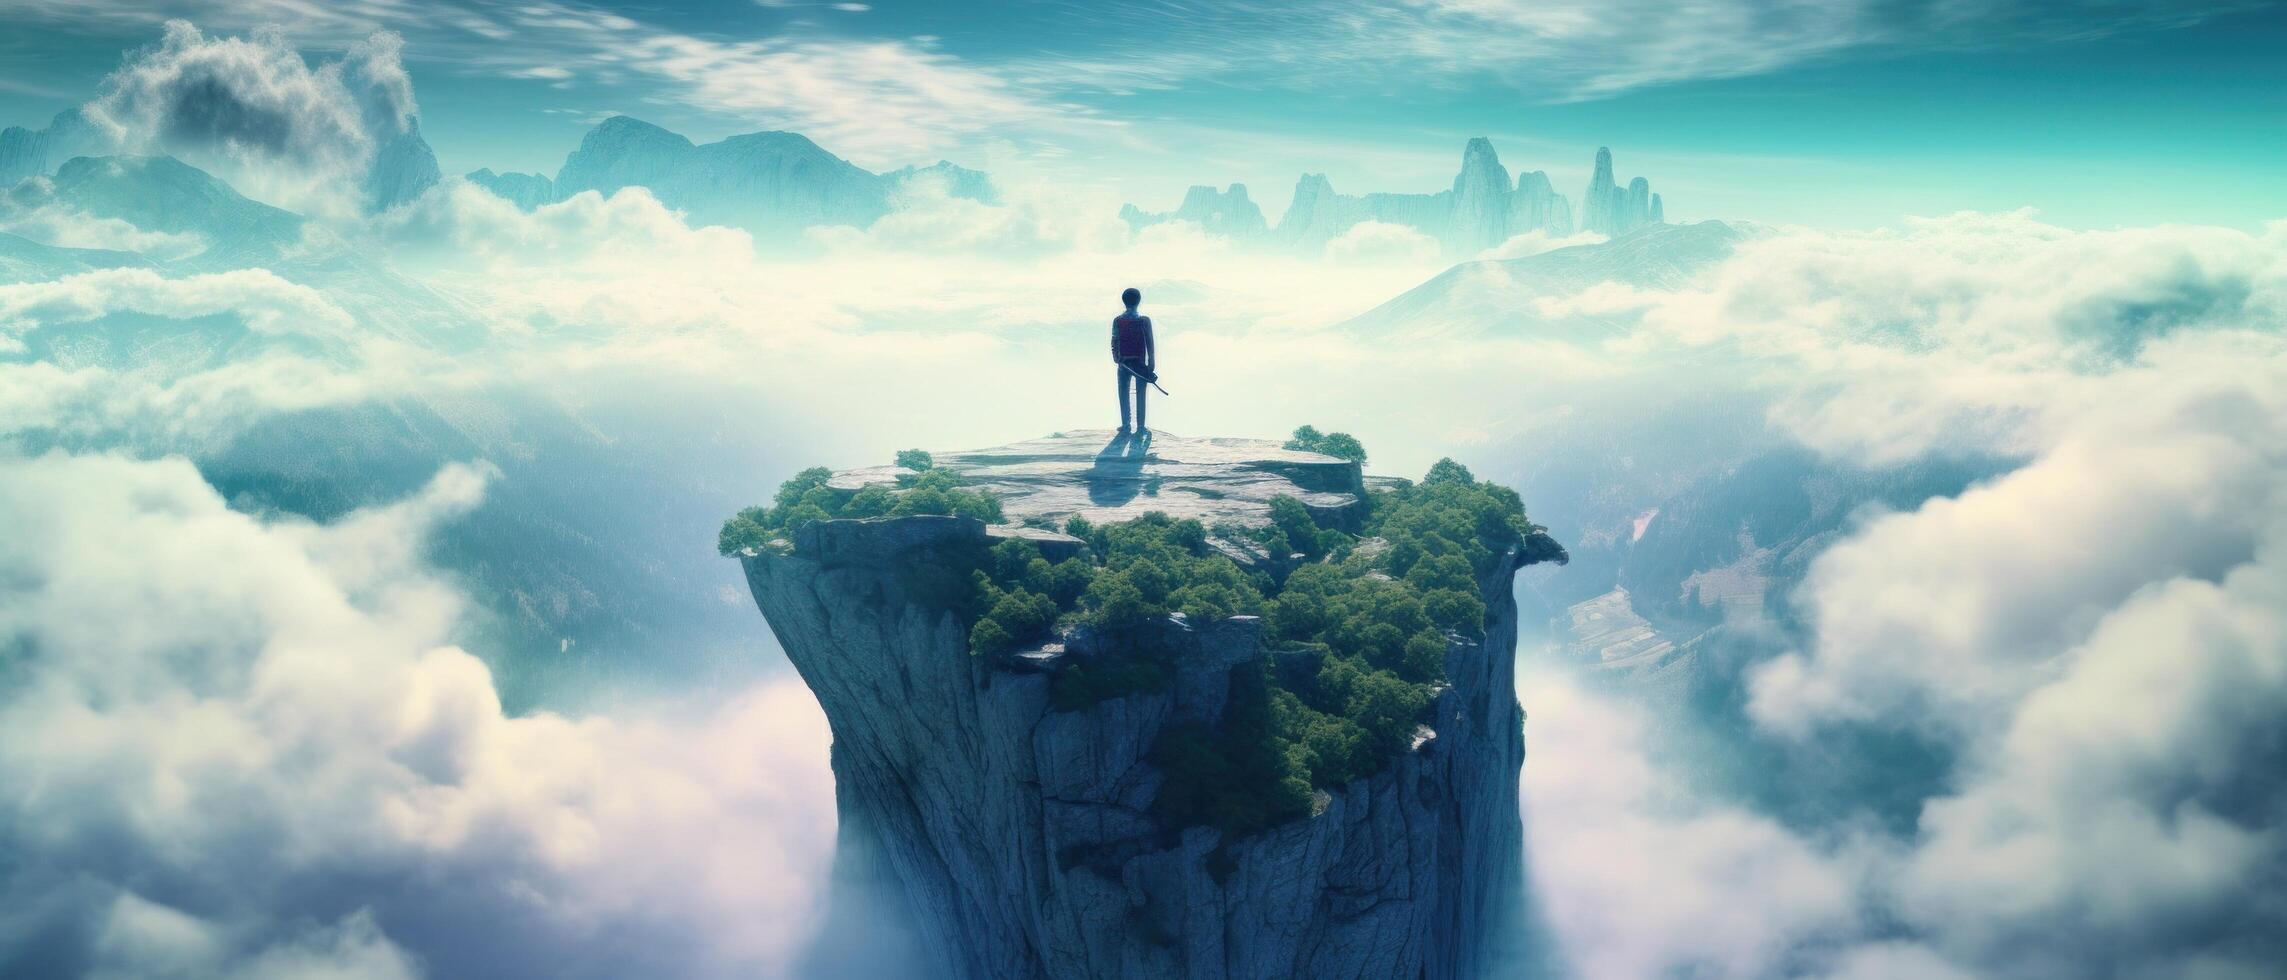 A man standing on rock on a mountain overlooking the clouds. Illustration photo